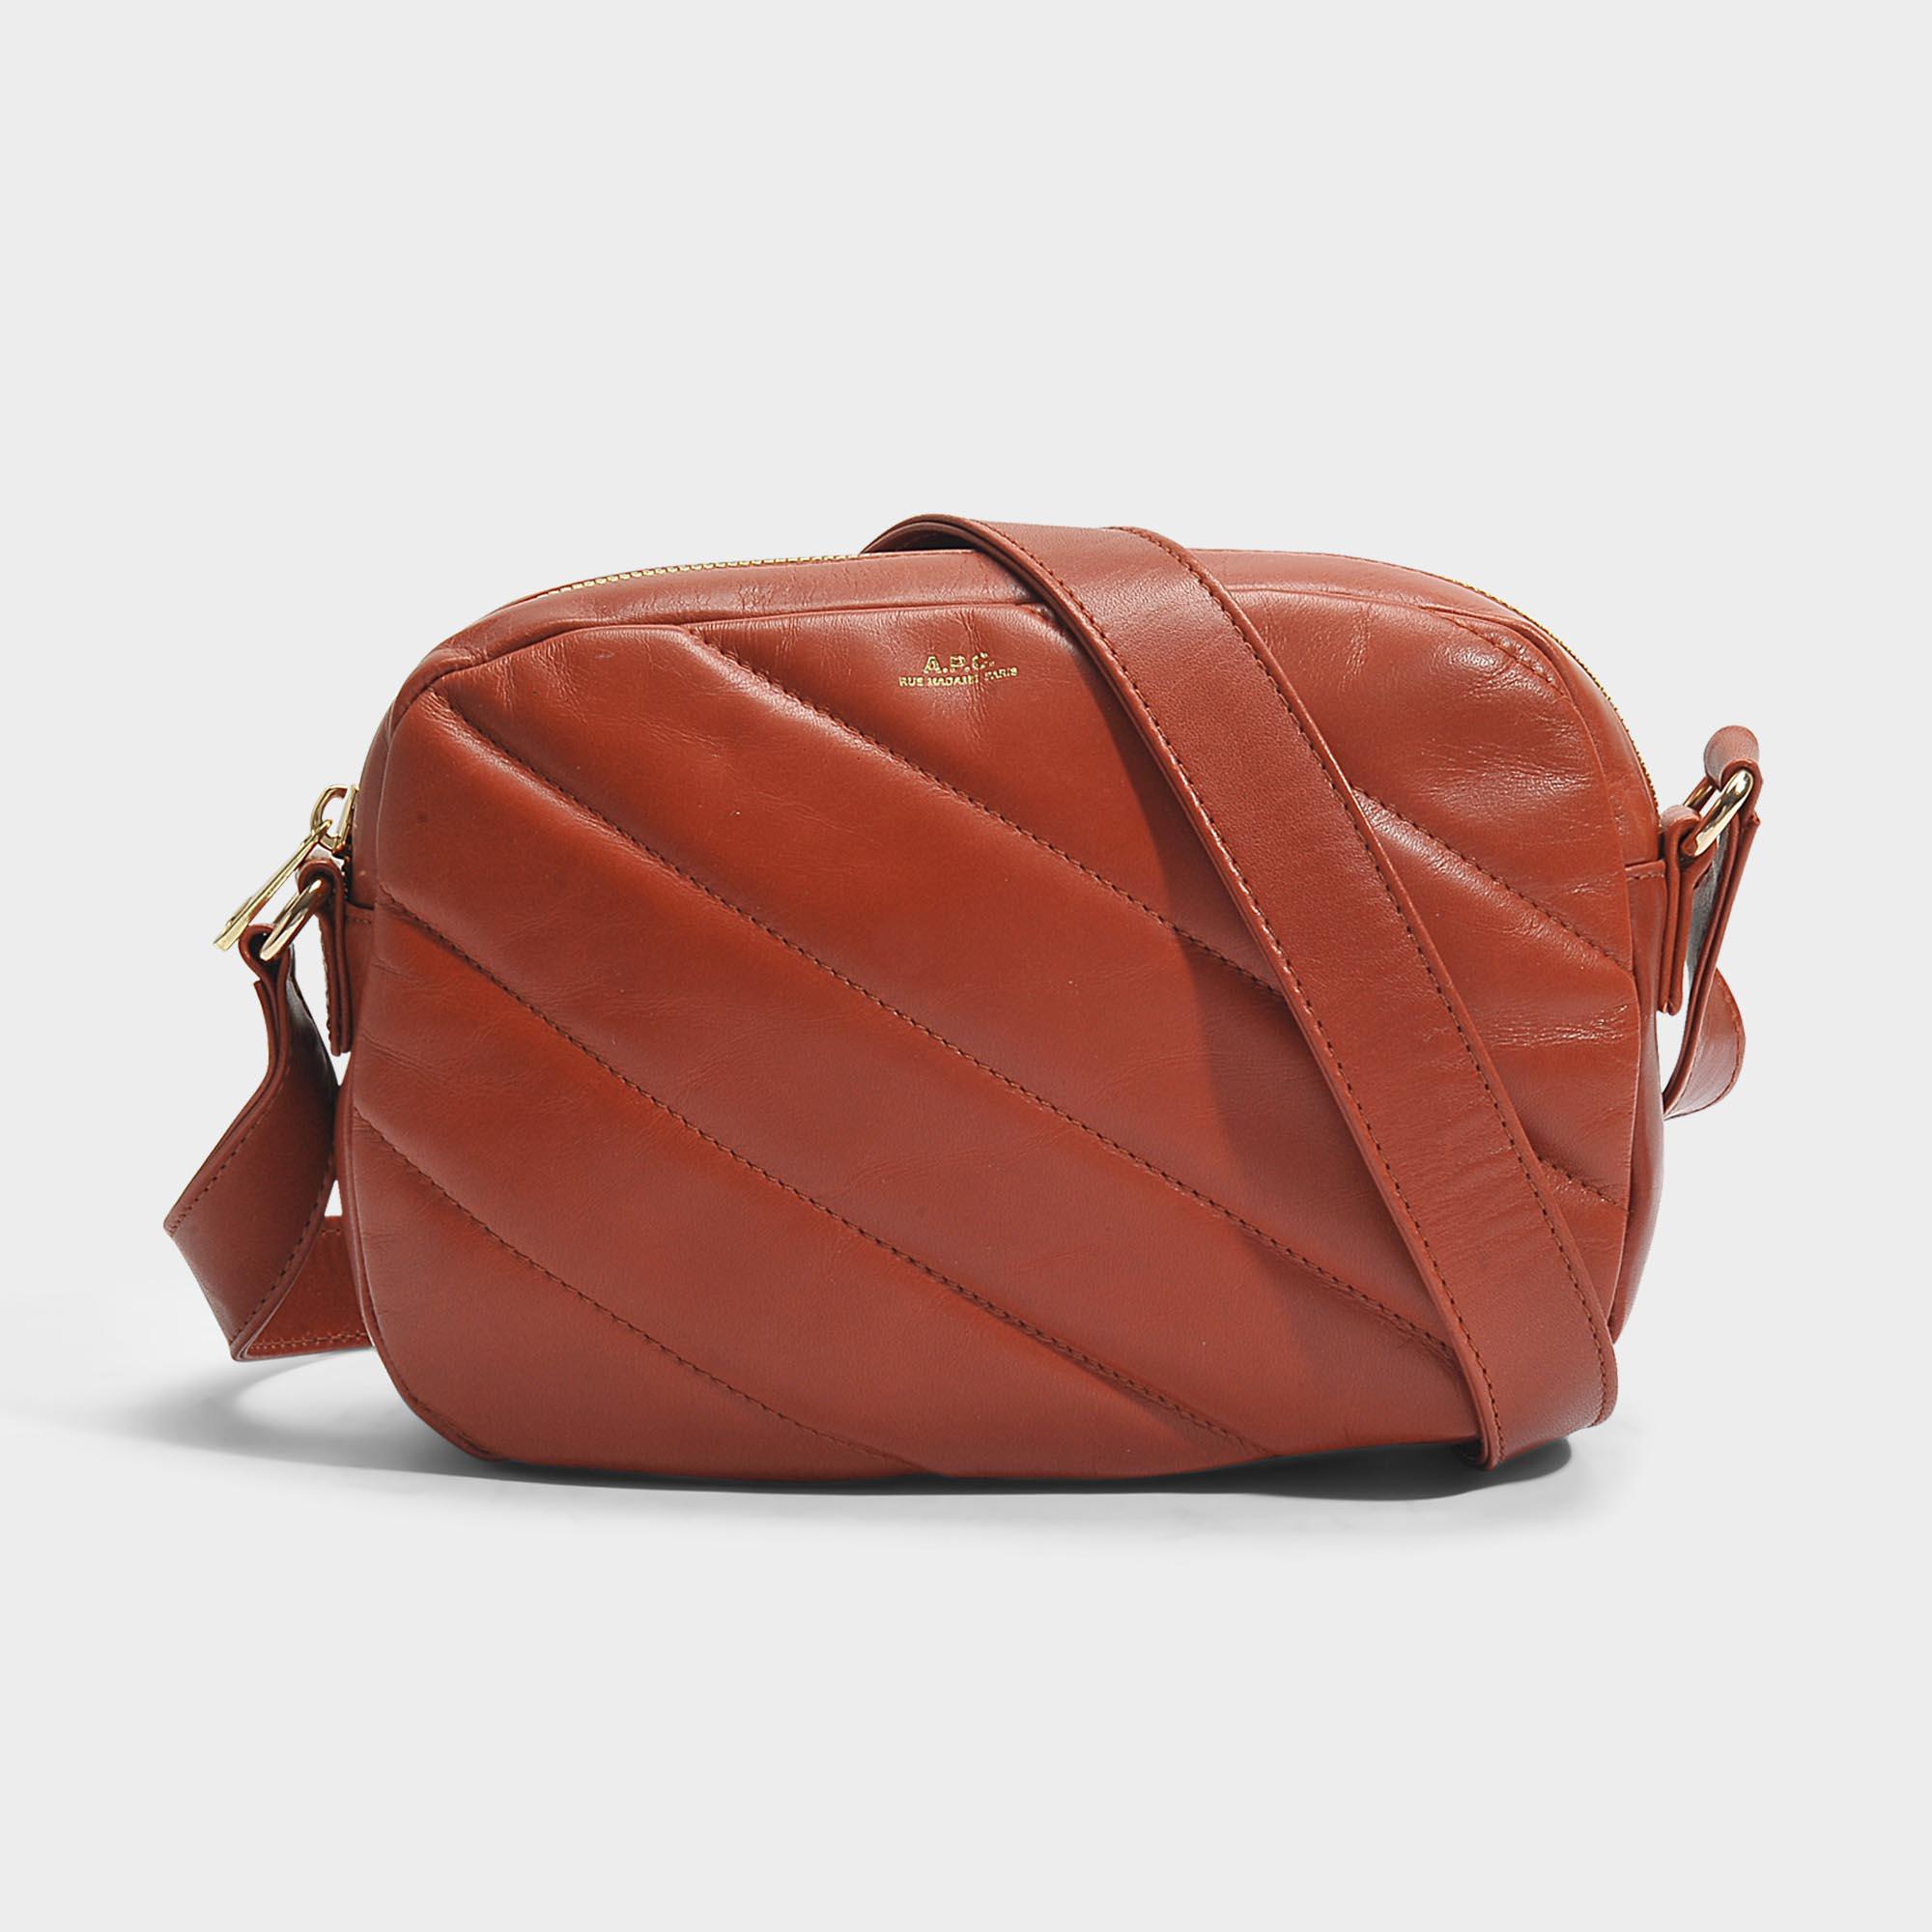 A.P.C. Suede Meryl Bag In Brique Leather in Red - Lyst